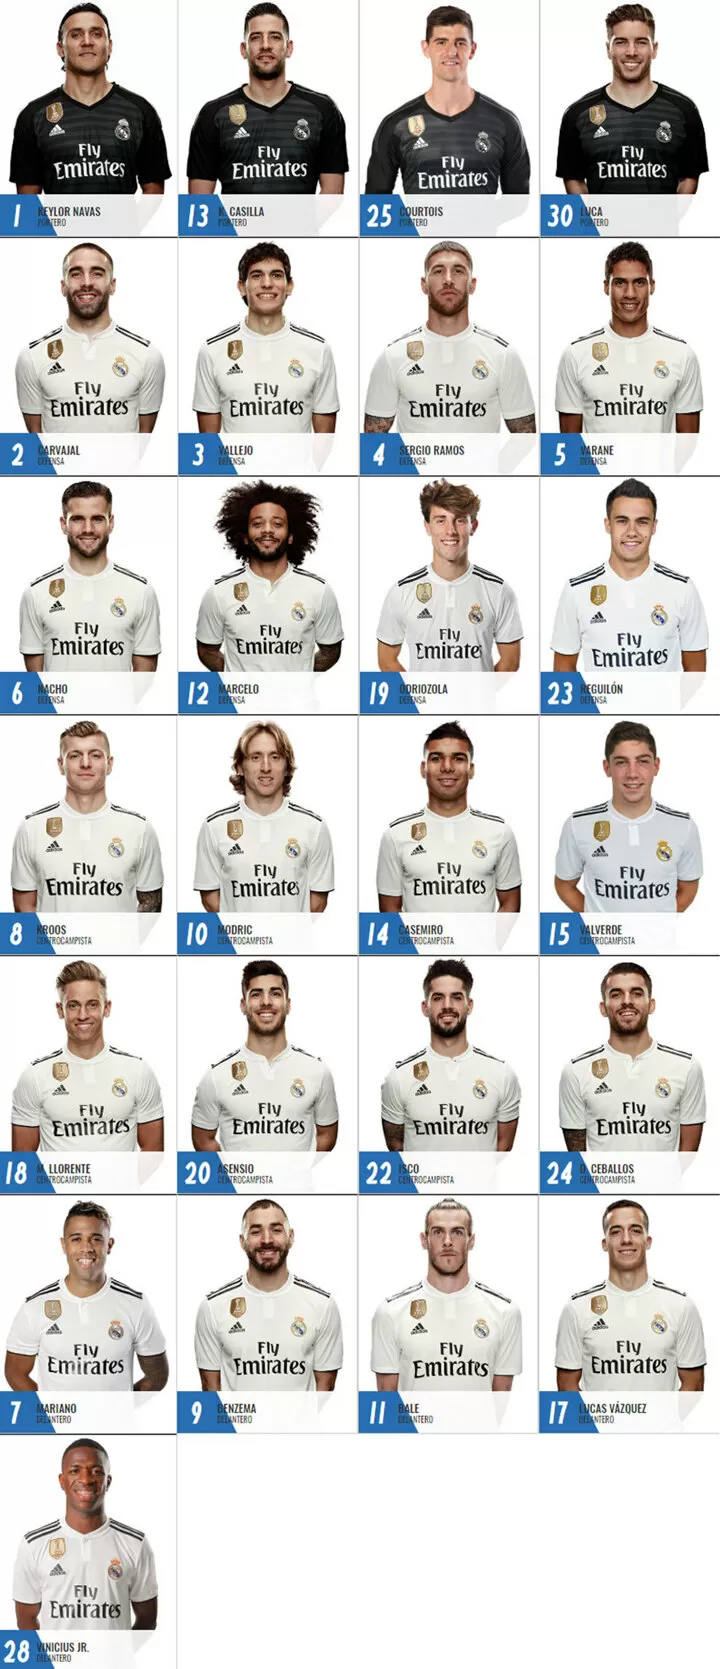 Real Madrid confirm shirt numbers: 15 